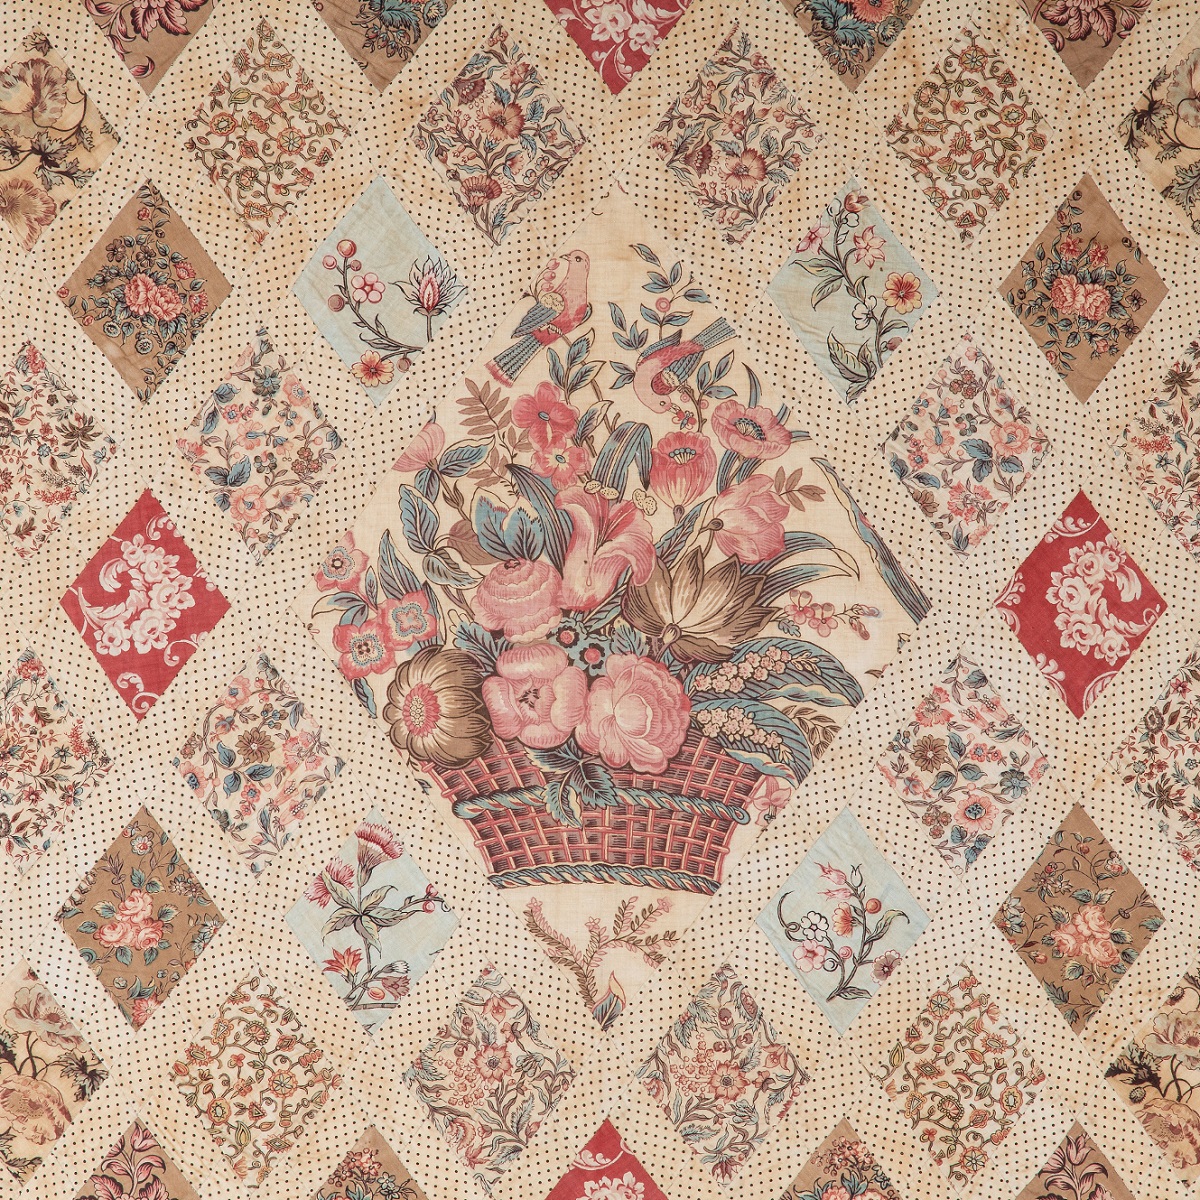 Centre of the Austen family patchwork coverlet